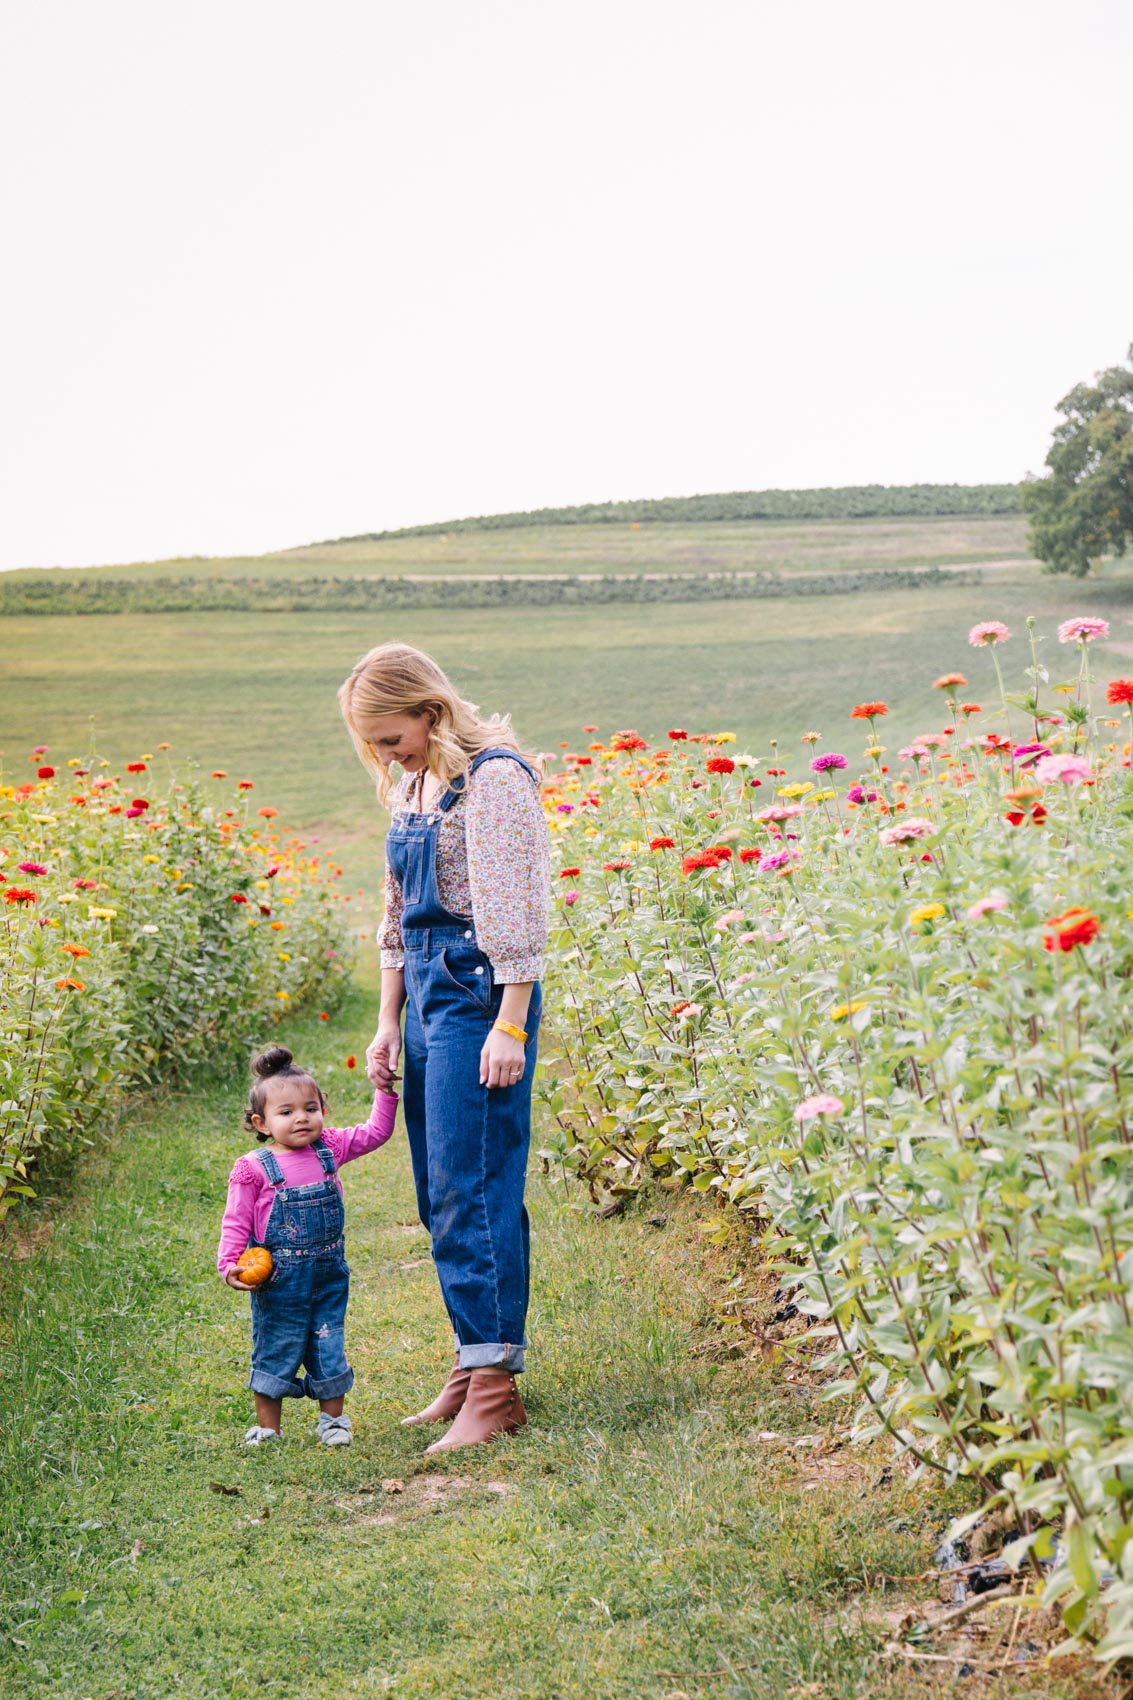 How to style overalls at the pumpkin patch for fall